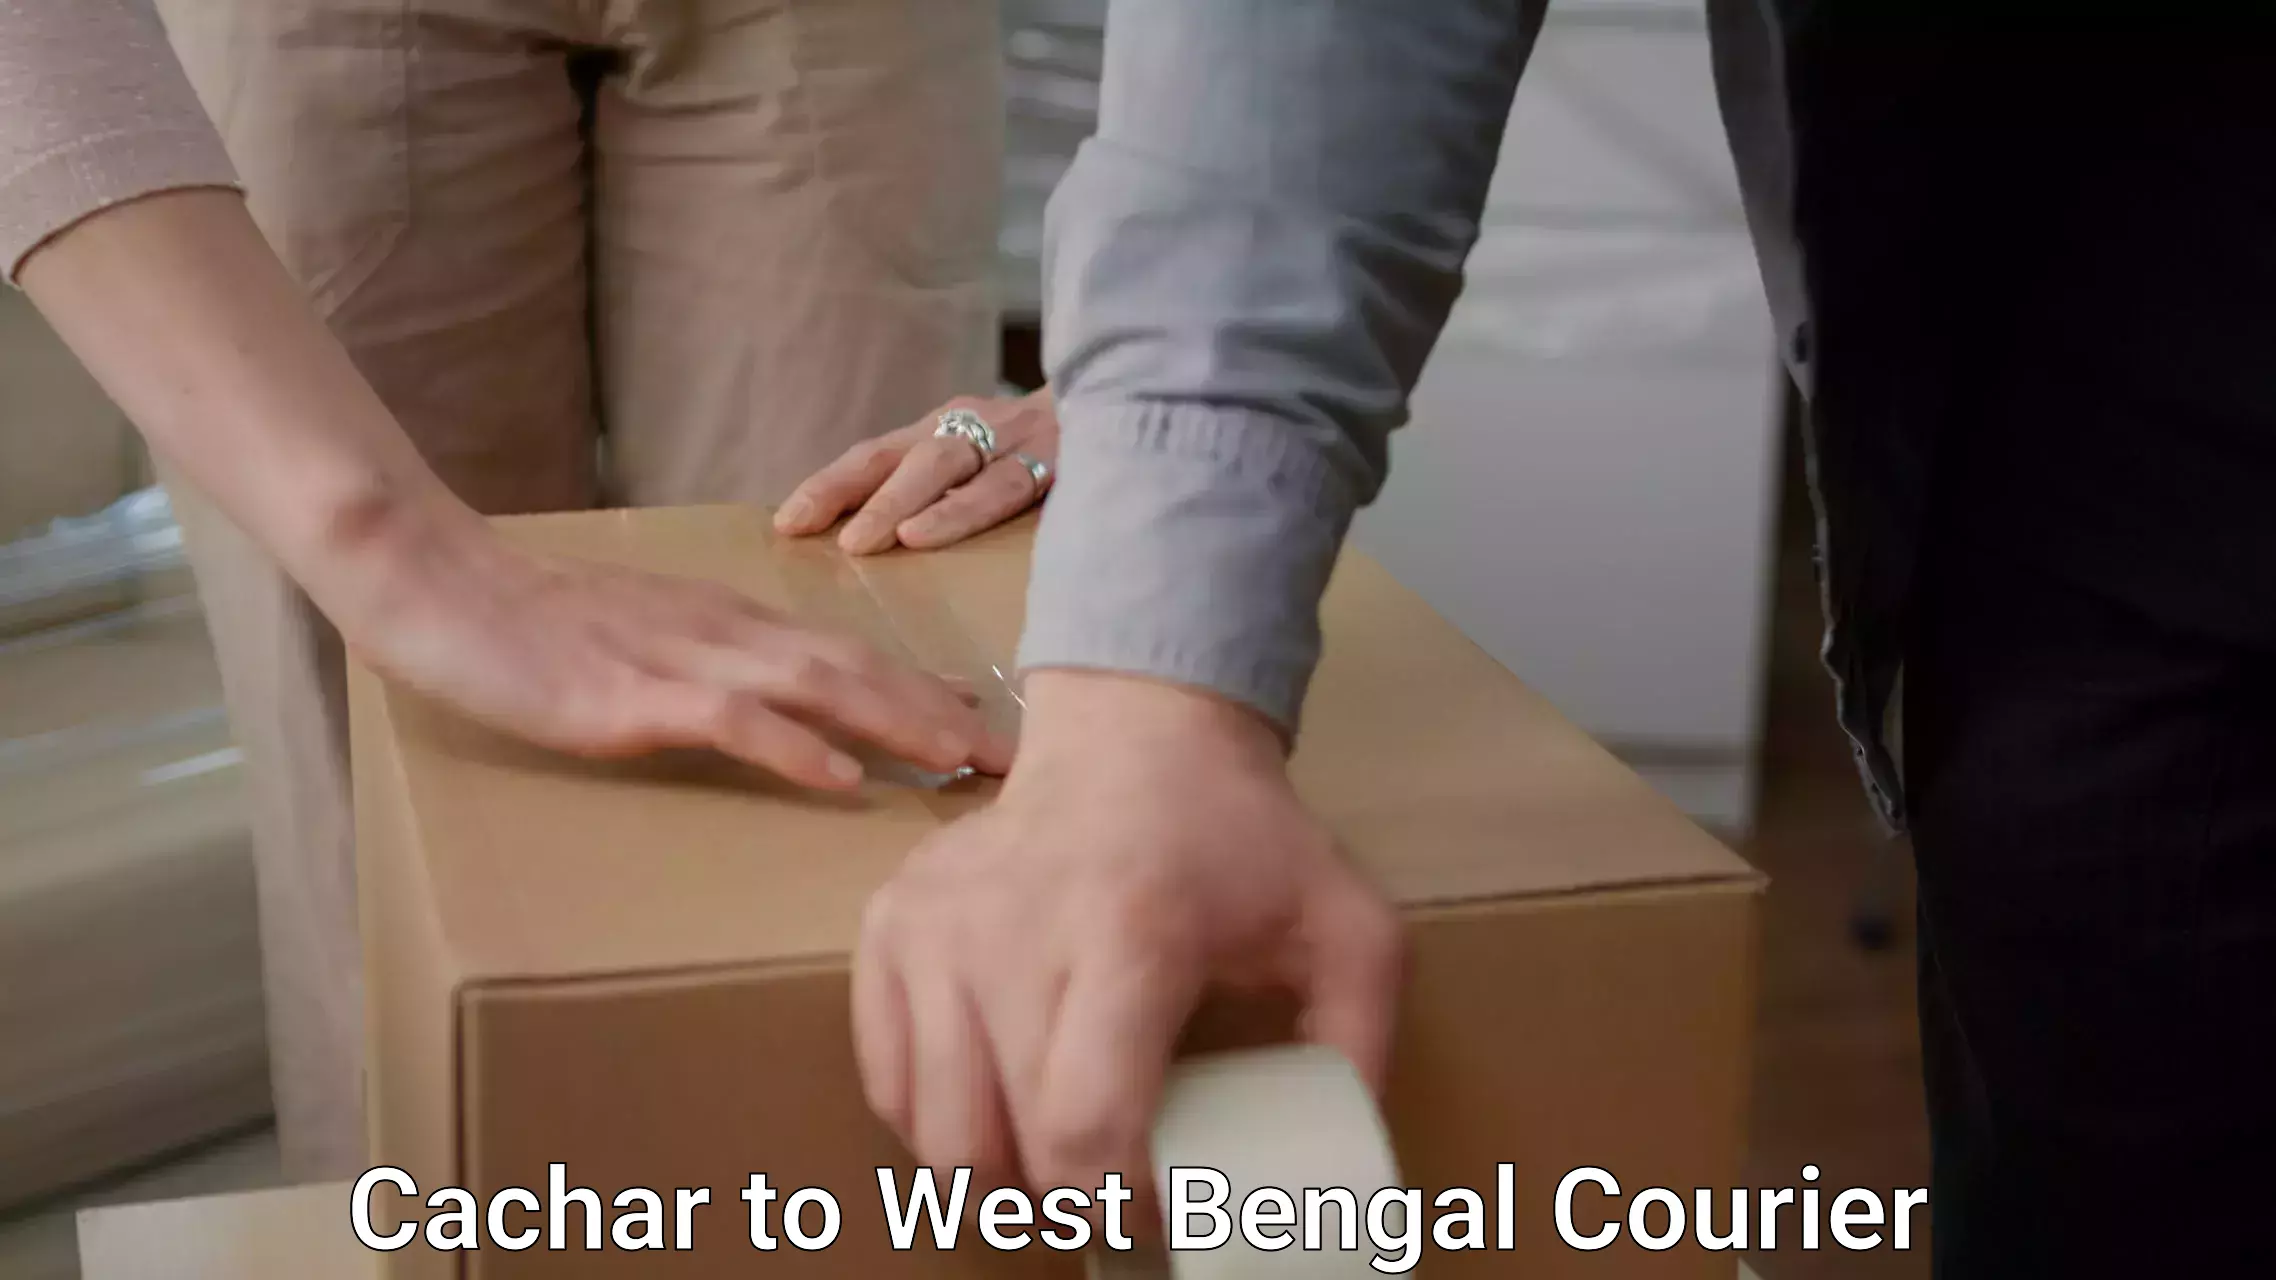 Furniture moving specialists Cachar to West Bengal